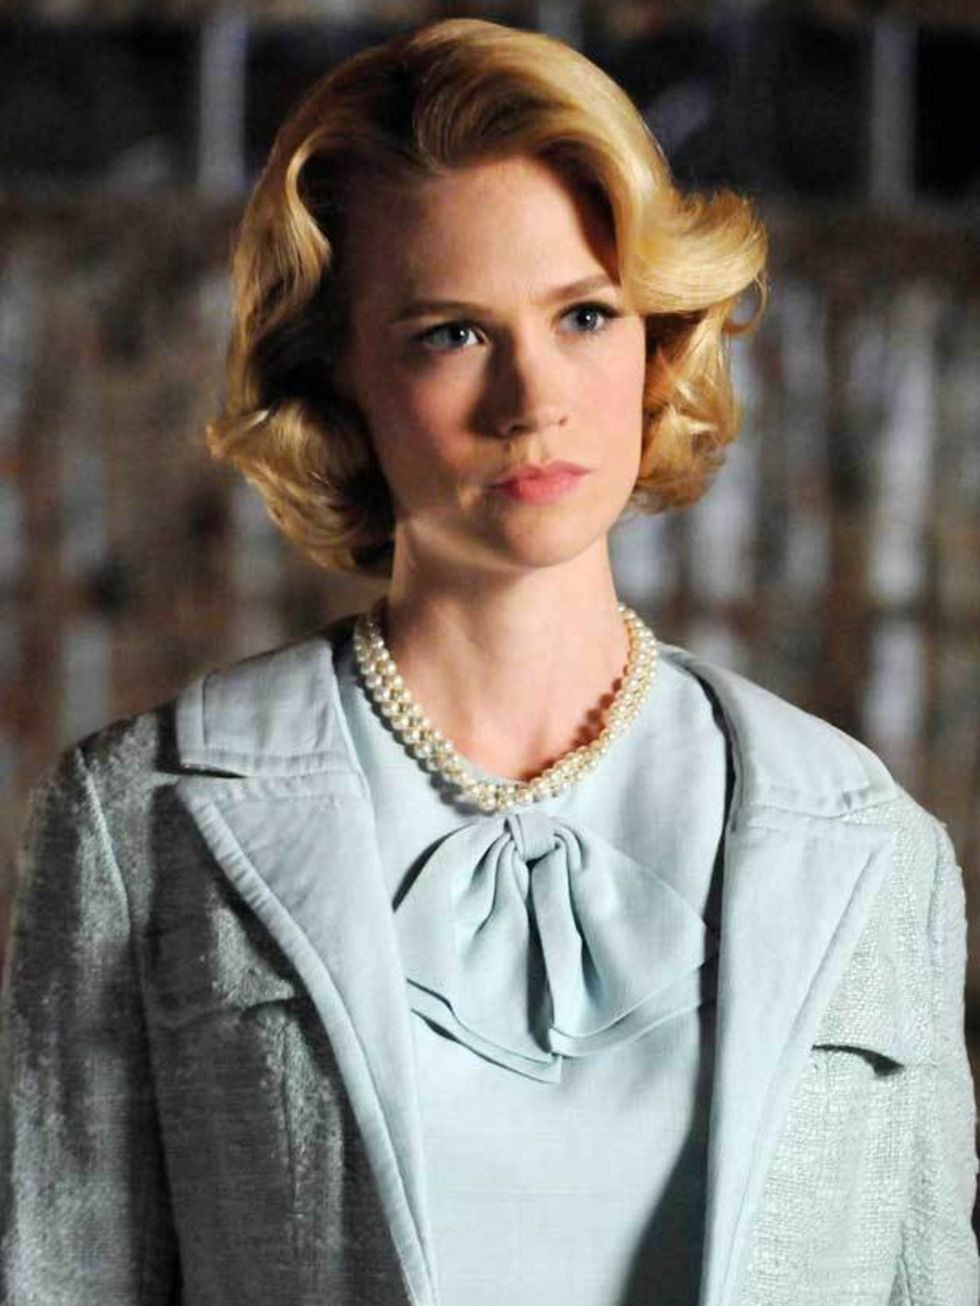 <p><a href="http://www.elleuk.com/content/search?SearchText=Mad+Men+&amp;SearchButton=Search">January Jones</a> in a tweed twin-set as the beautiful Betty Draper in the hit TV series <a href="http://www.elleuk.com/content/search?SearchText=Mad+Men&amp;Sea